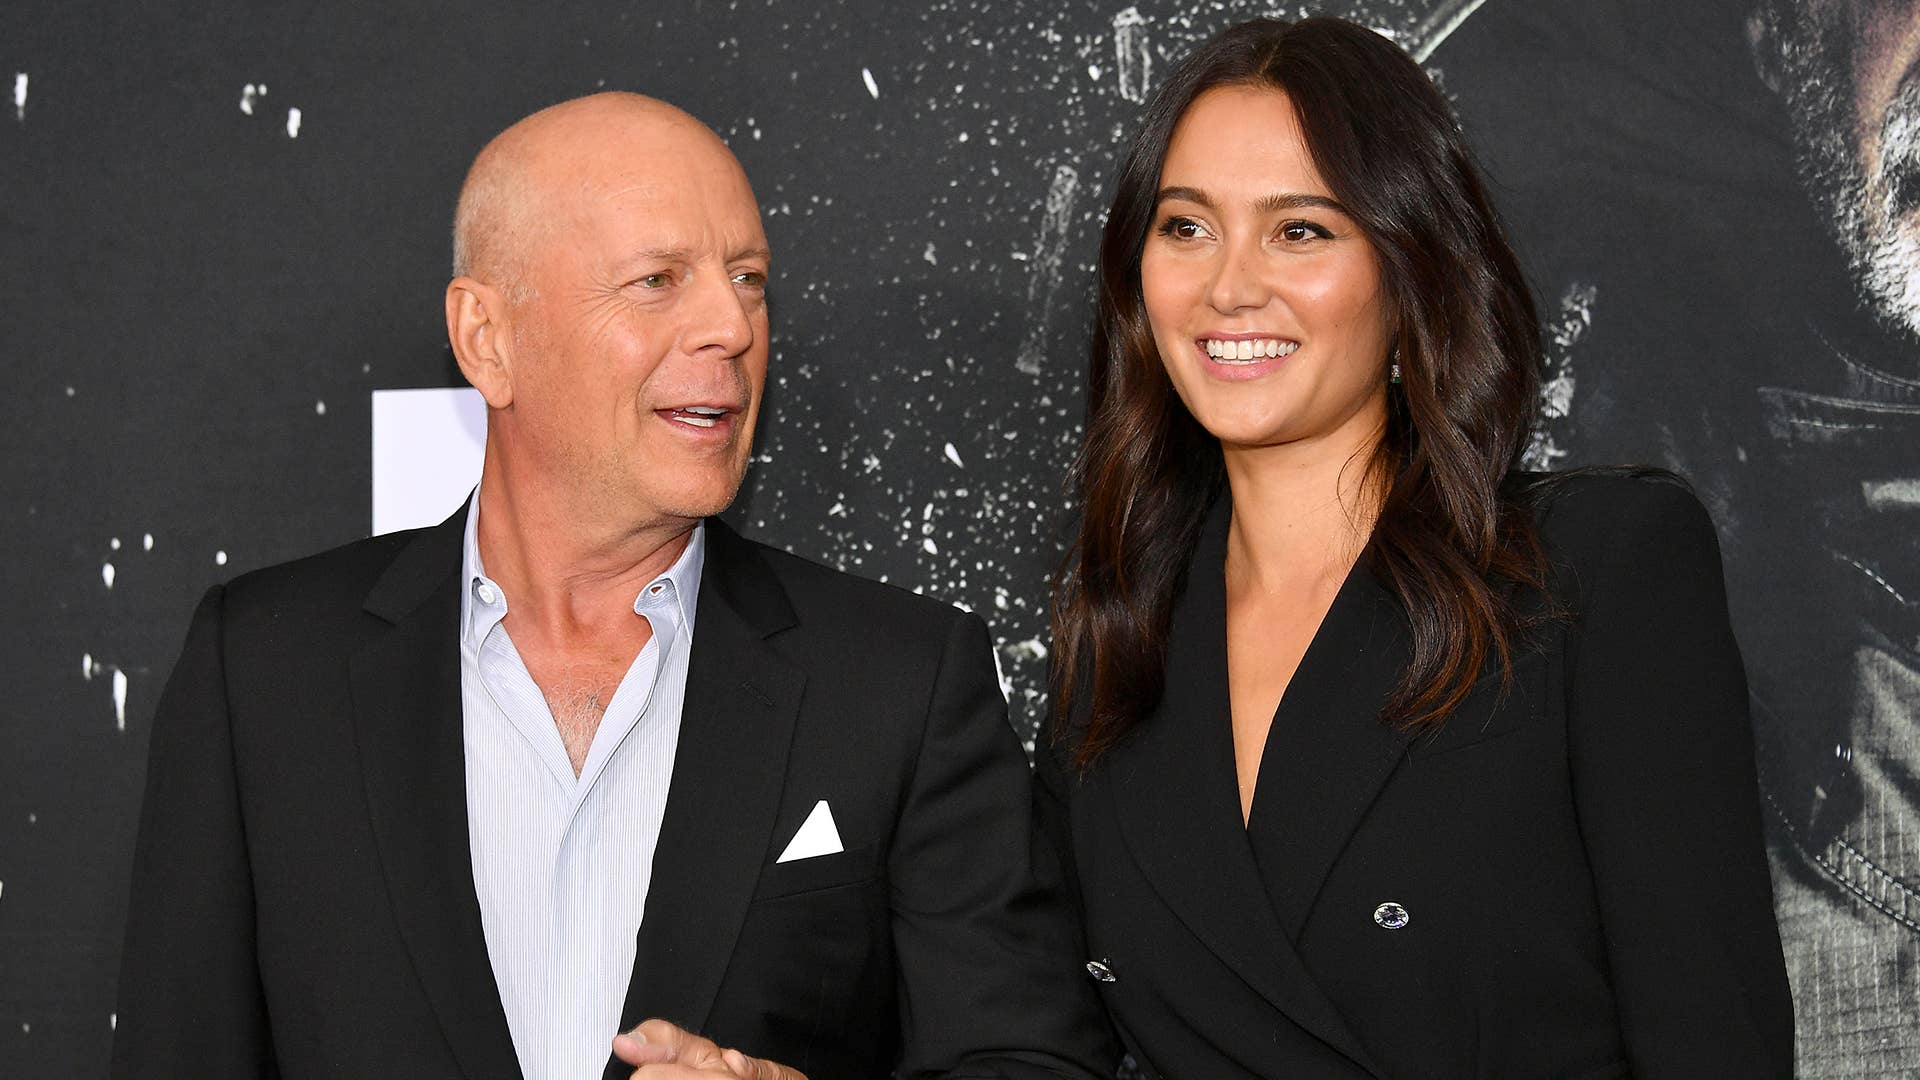 Bruce Willis and Emma Heming attend the "Glass" NY Premiere at SVA Theater on January 15, 2019 in New York City.